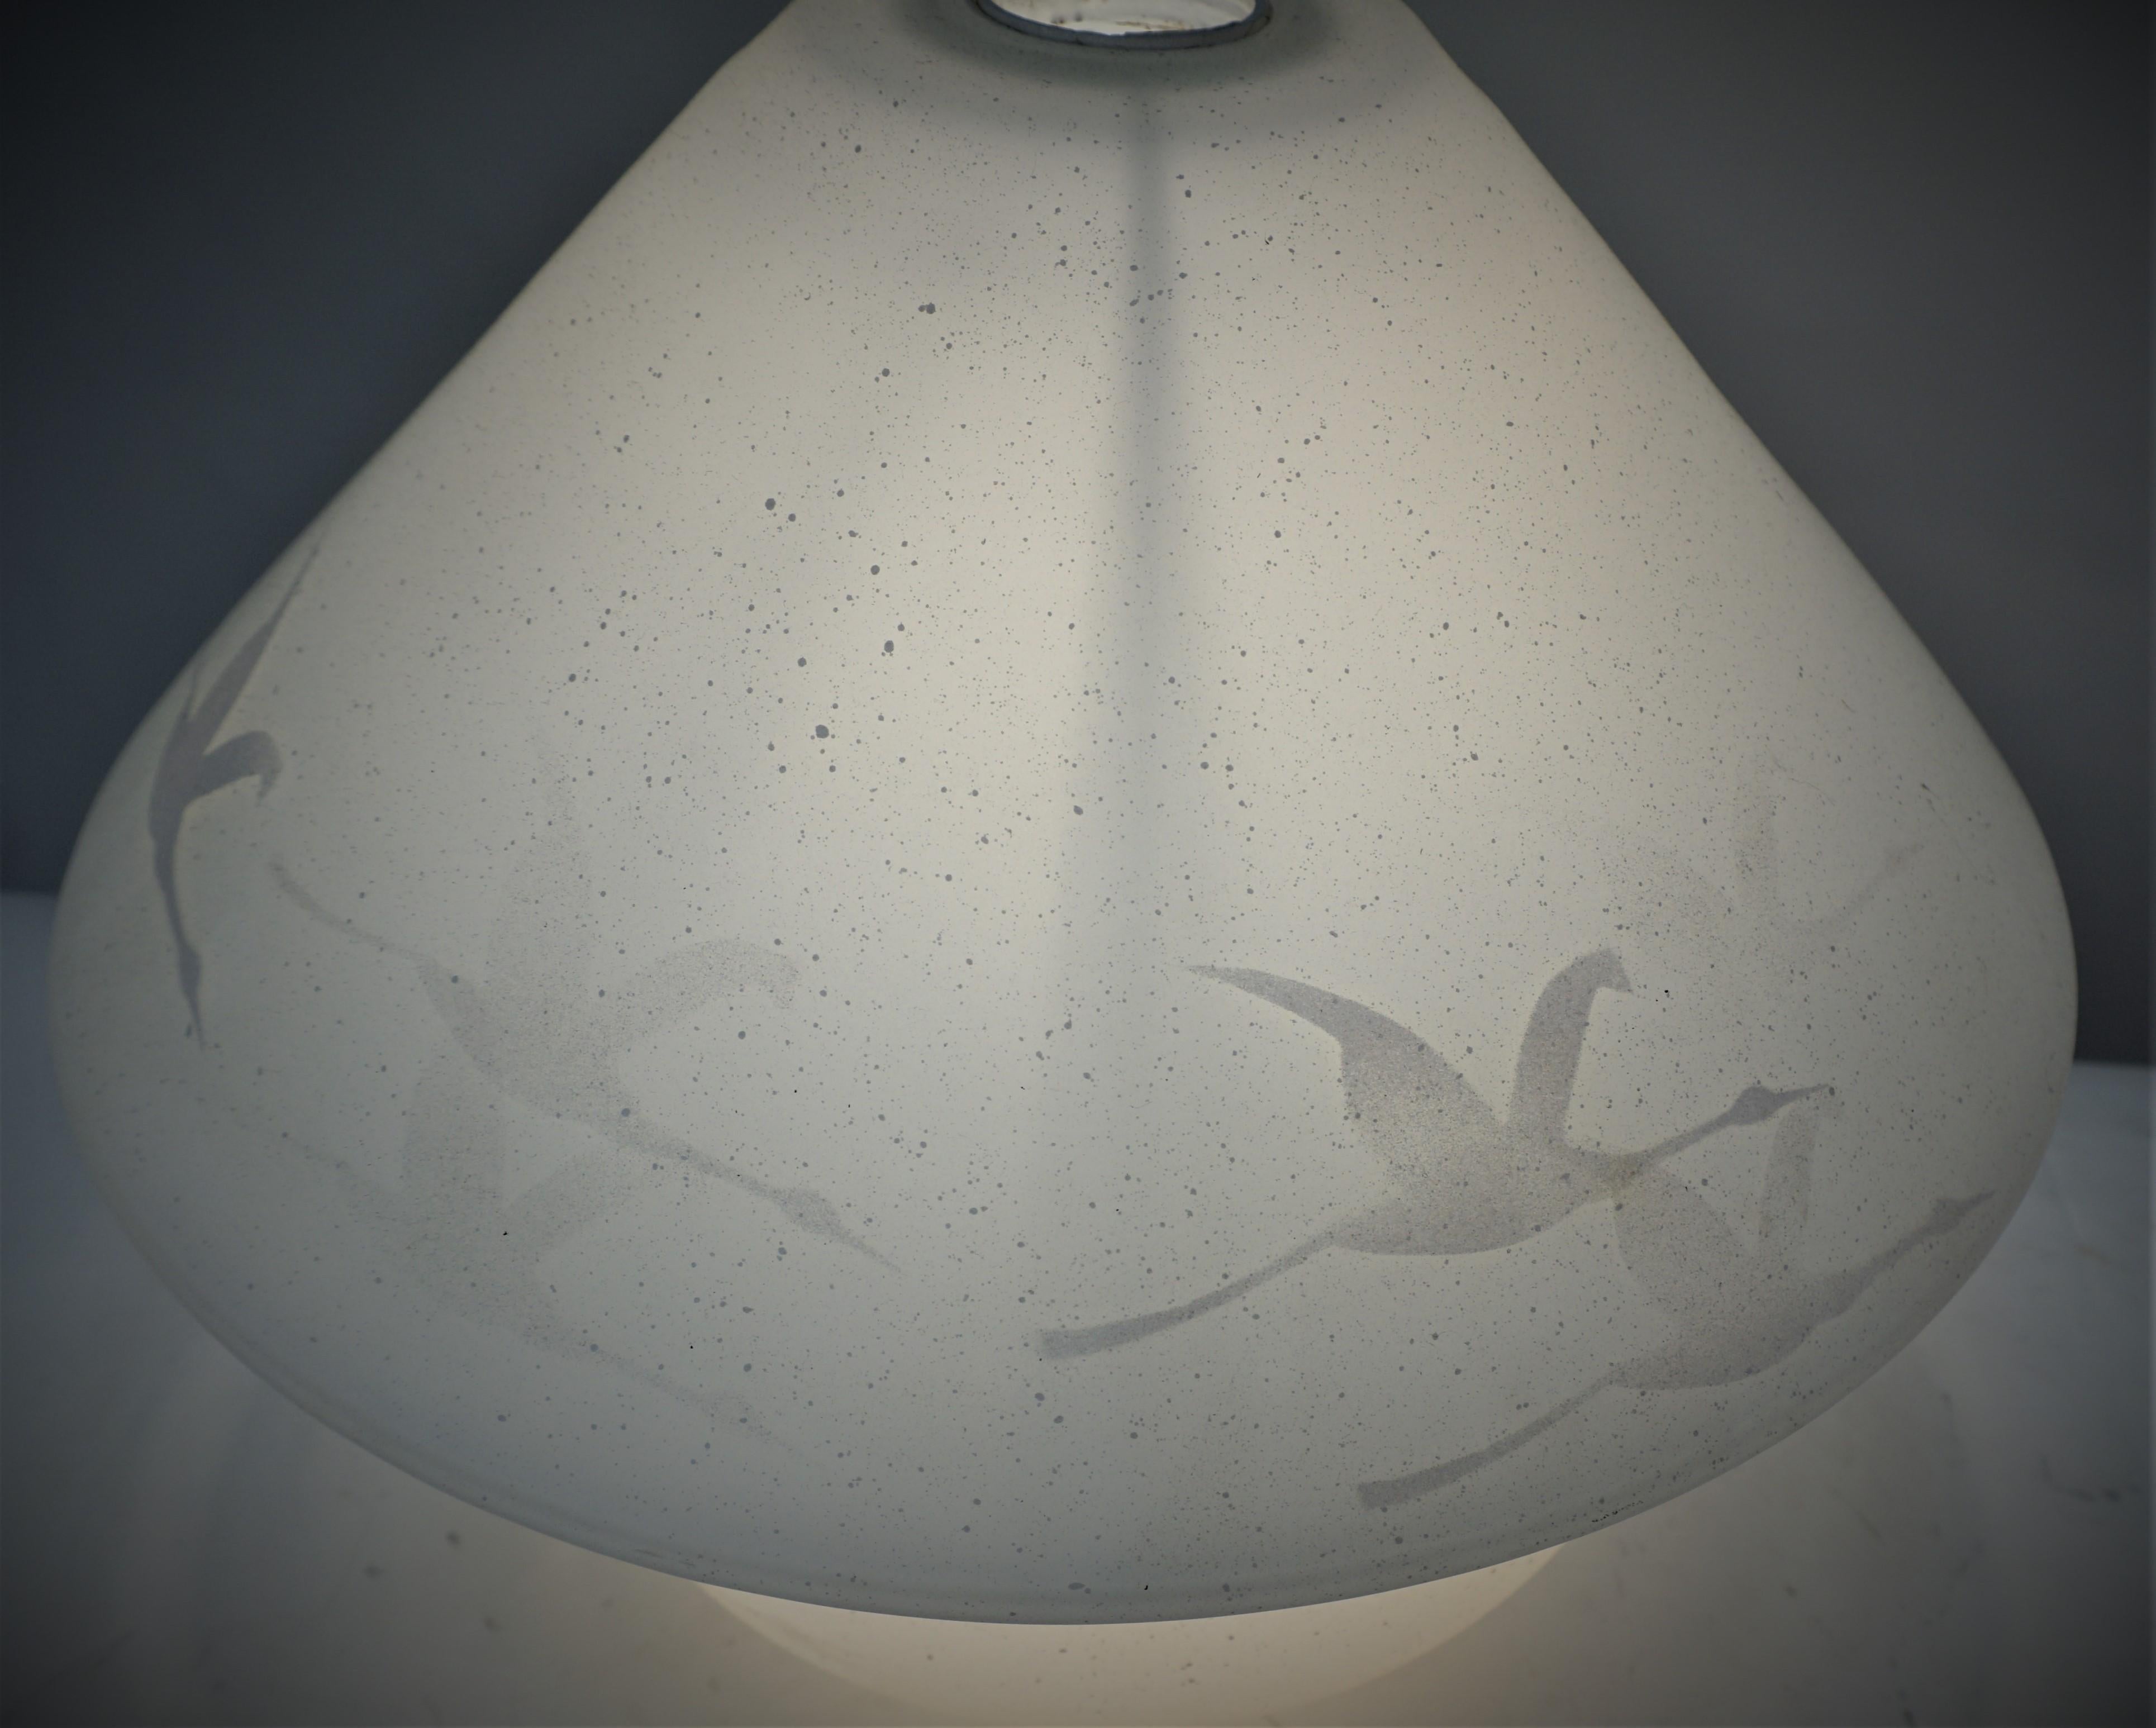 Mushroom lamp, white enamel painting, flying geese over white opaline glass with light at top and base.